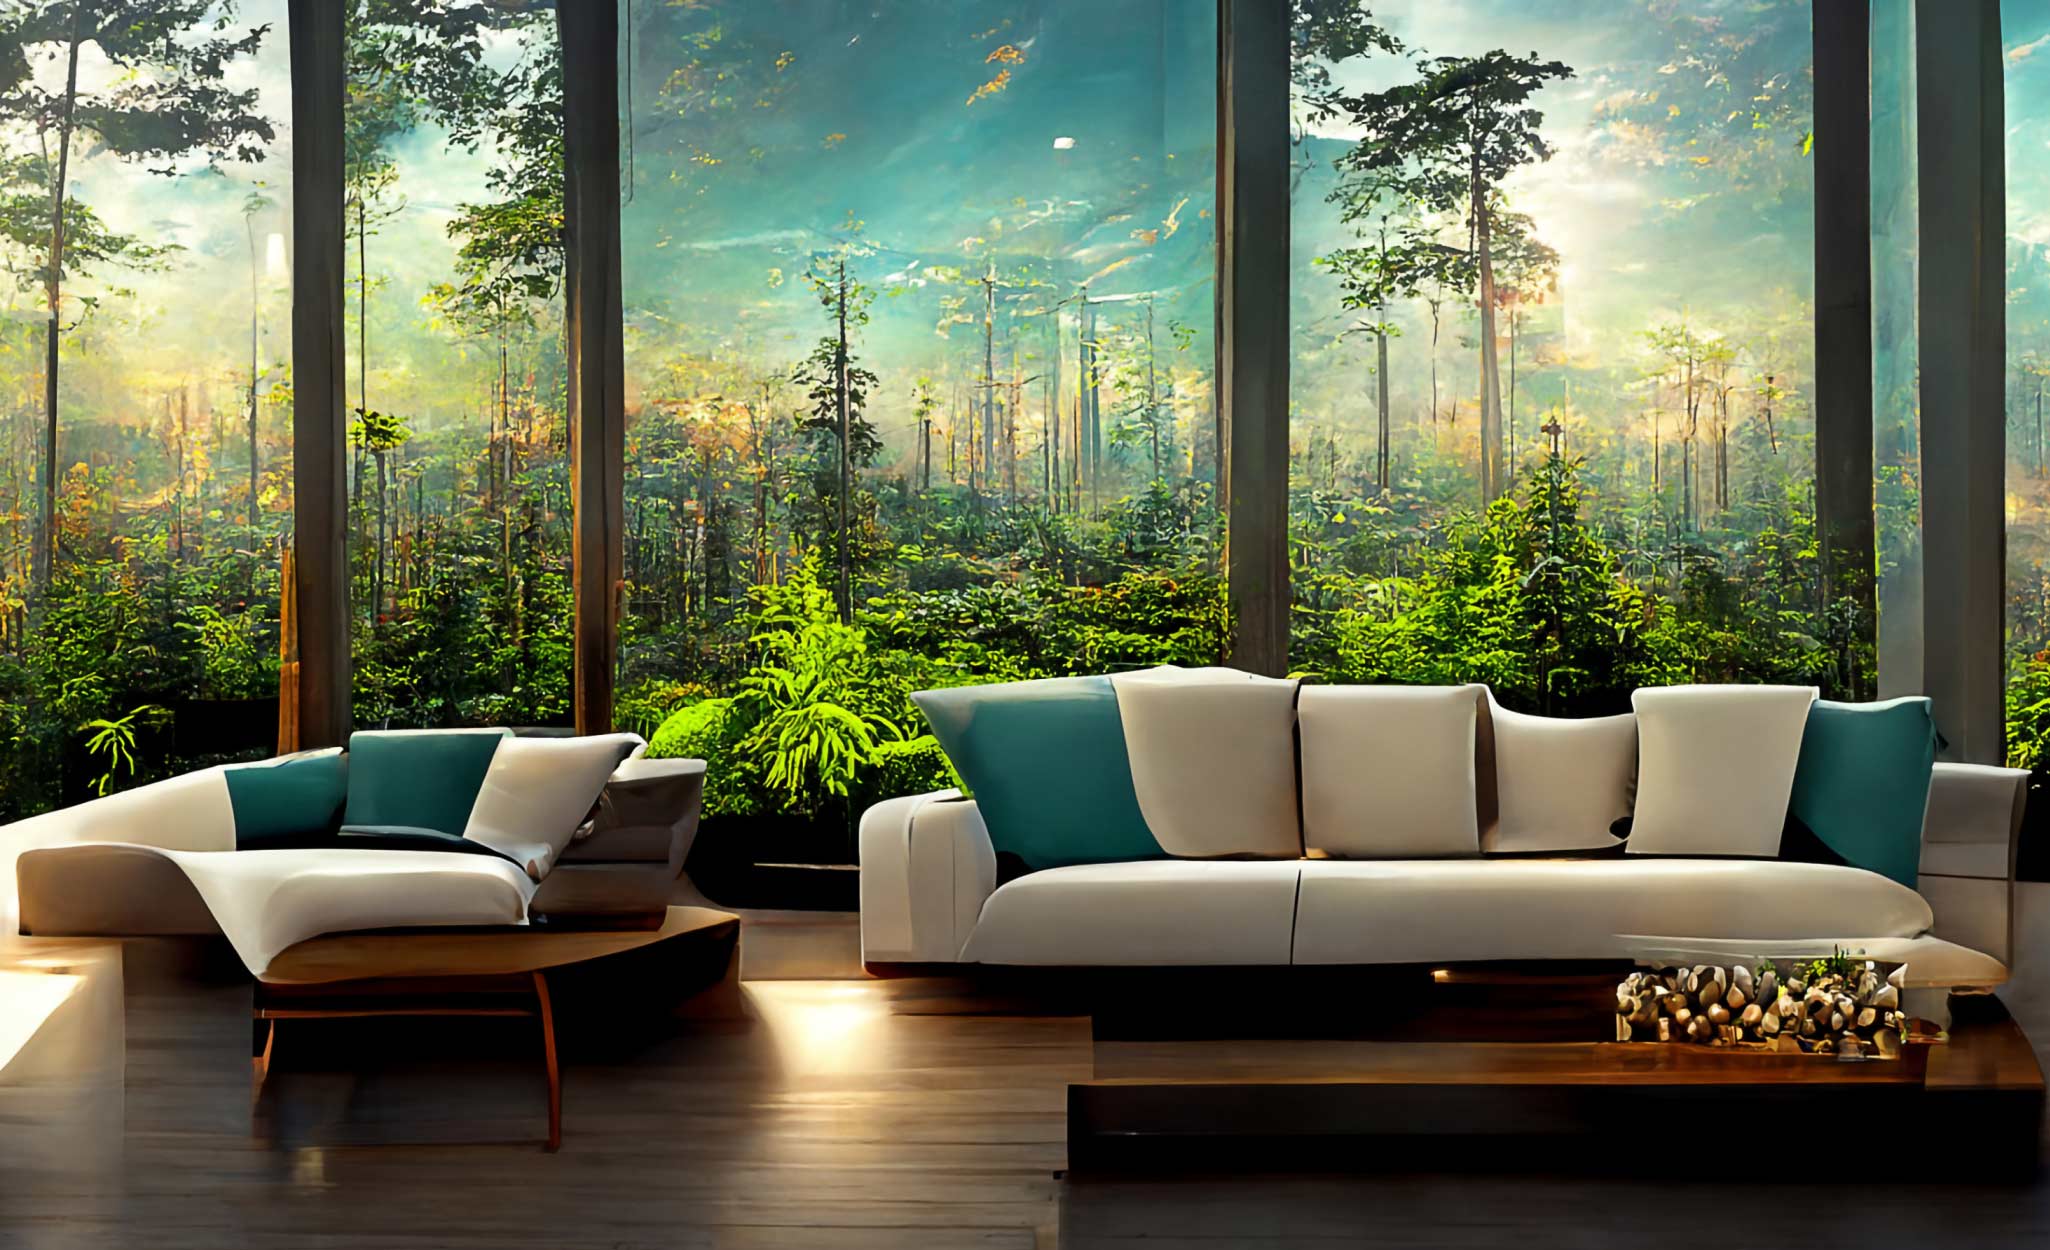 Wall art depicts nature scenes in a living room.